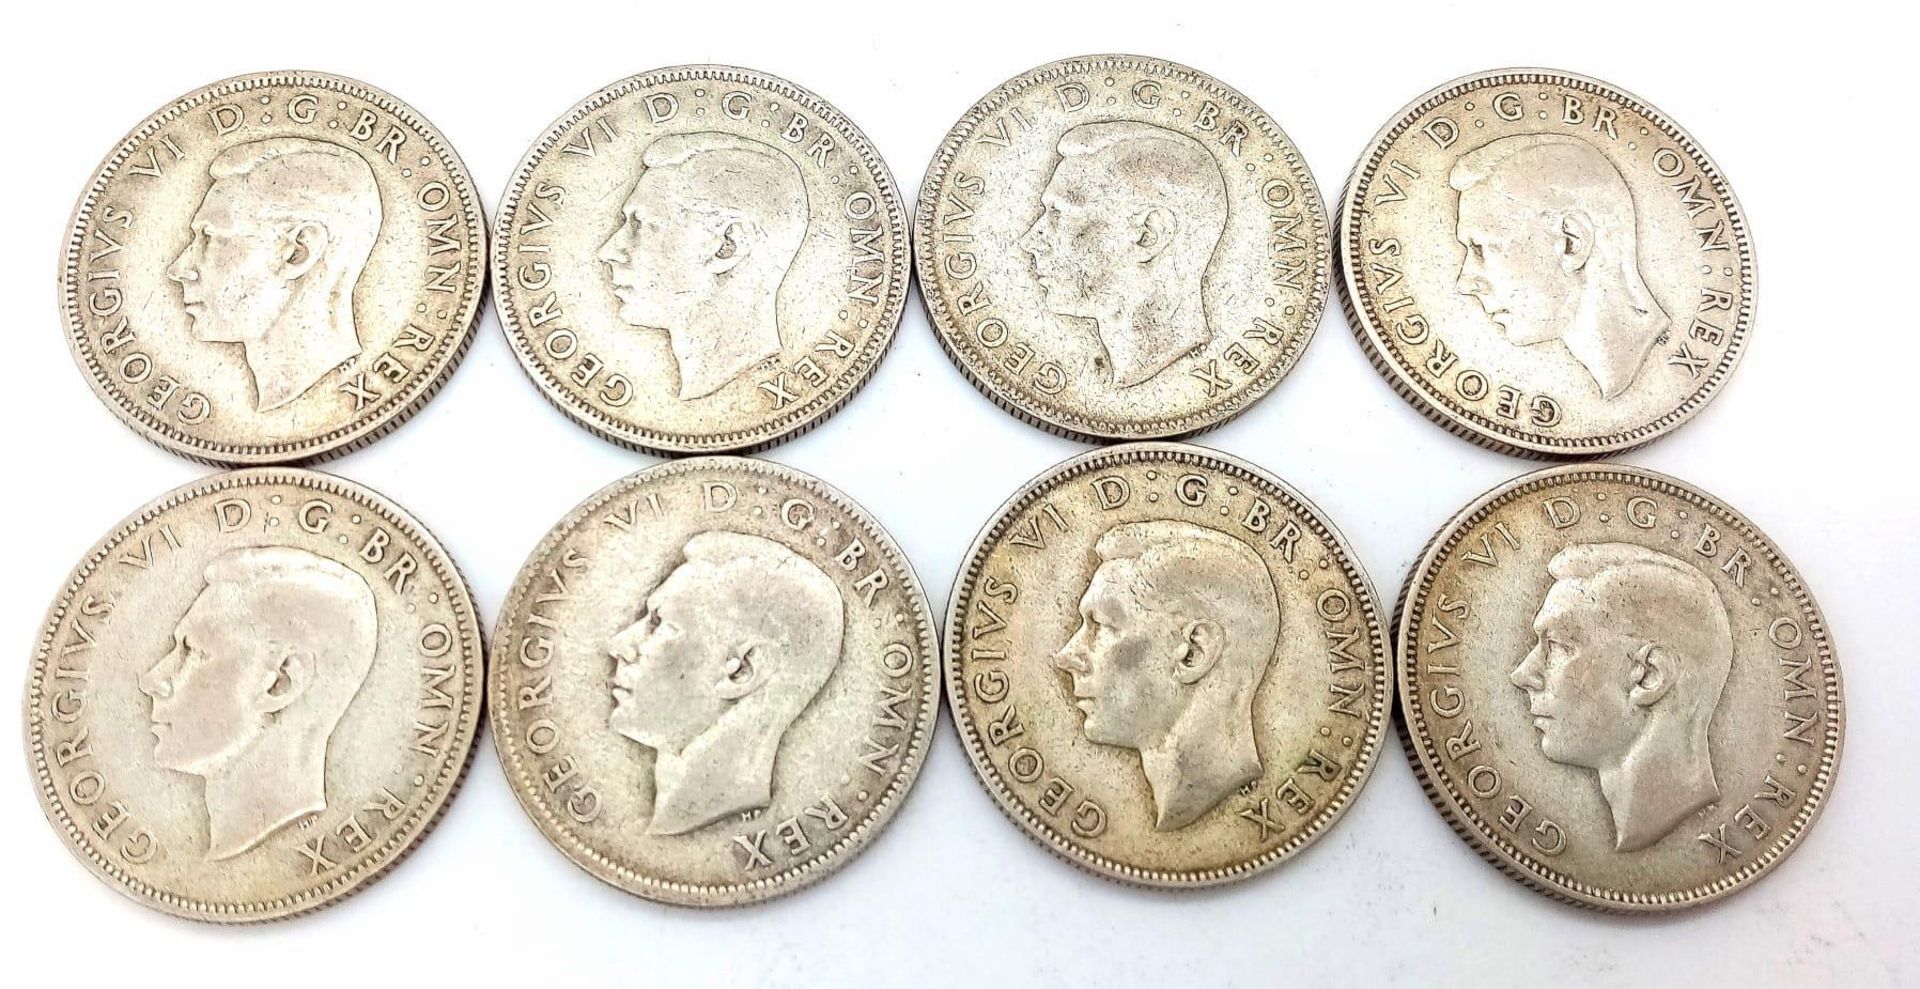 A Parcel of Eight Pre-1947, Silver Two Shilling Coins (Florins) Dates: 2 x 1940, 3 x 1942, 3 x 1945.